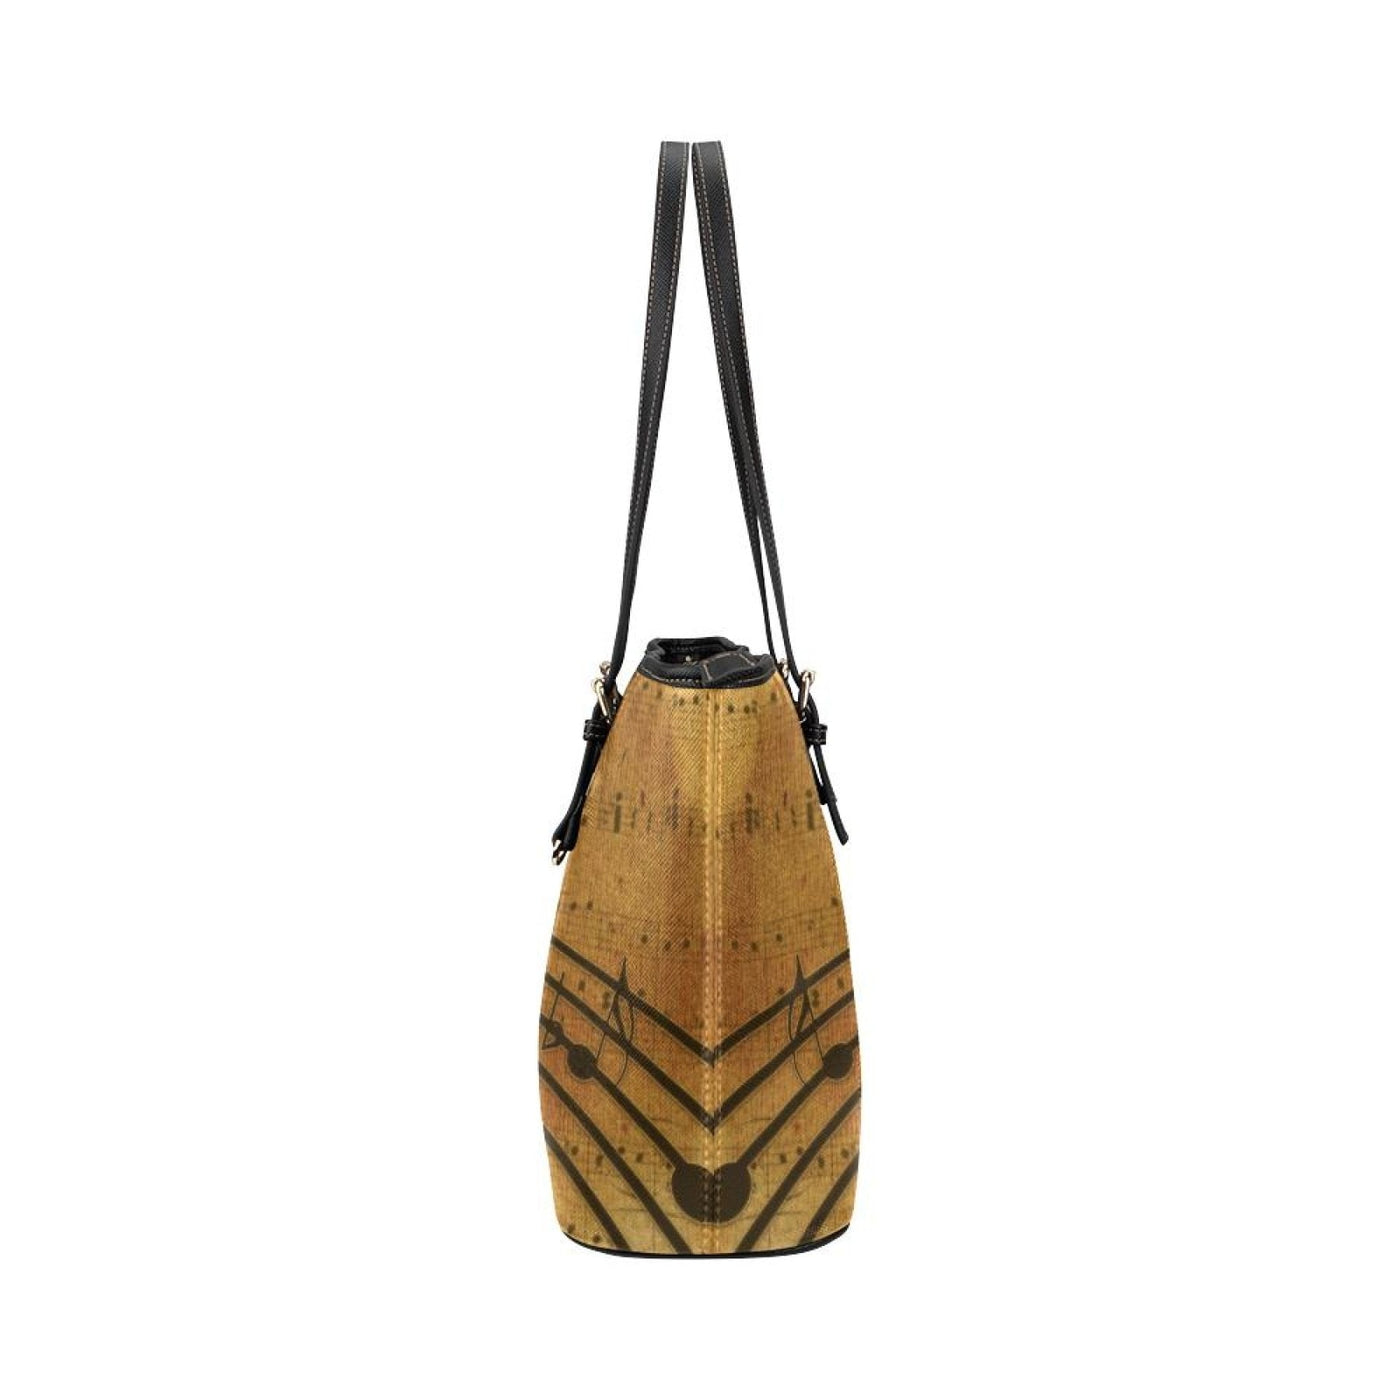 Large Leather Tote Shoulder Bag - Tan And Brown Musical Chords Pattern